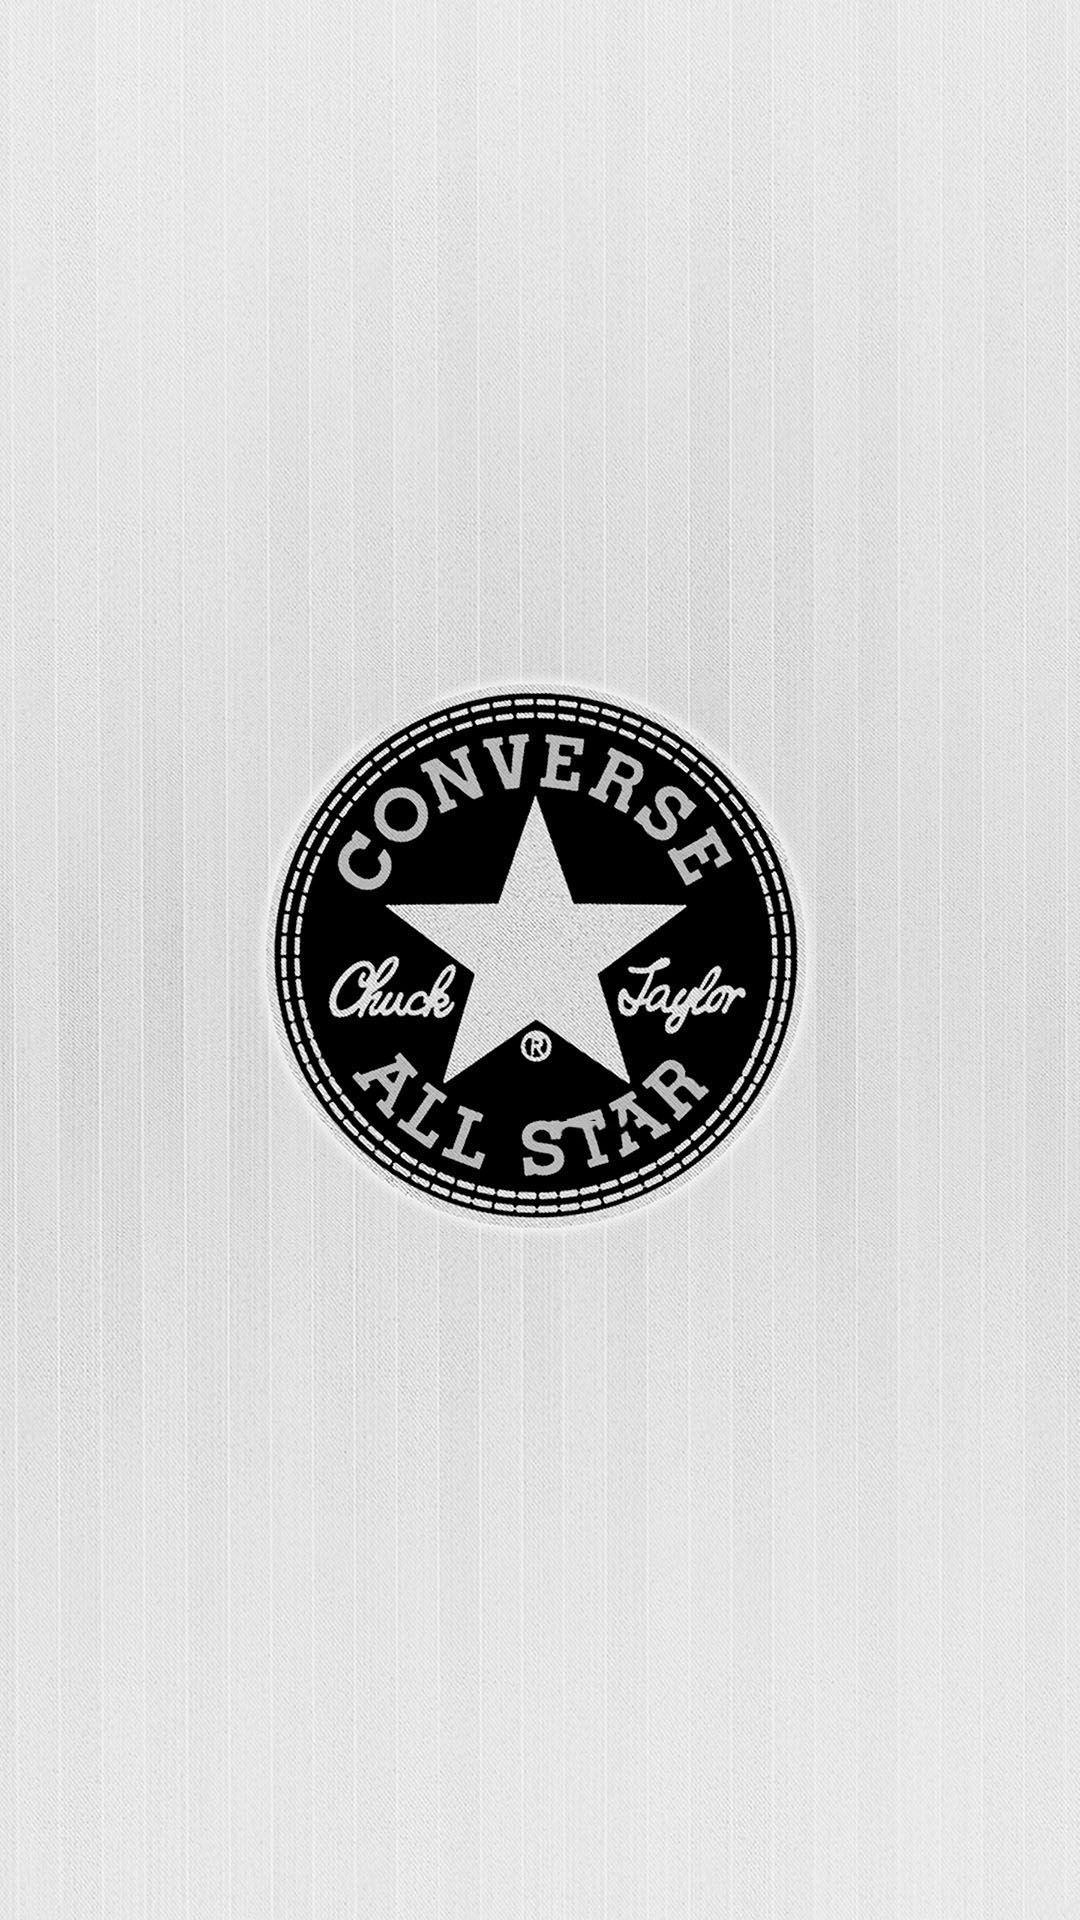 Converse All Star Chuck Taylor Logo Light Android Wallpaper free